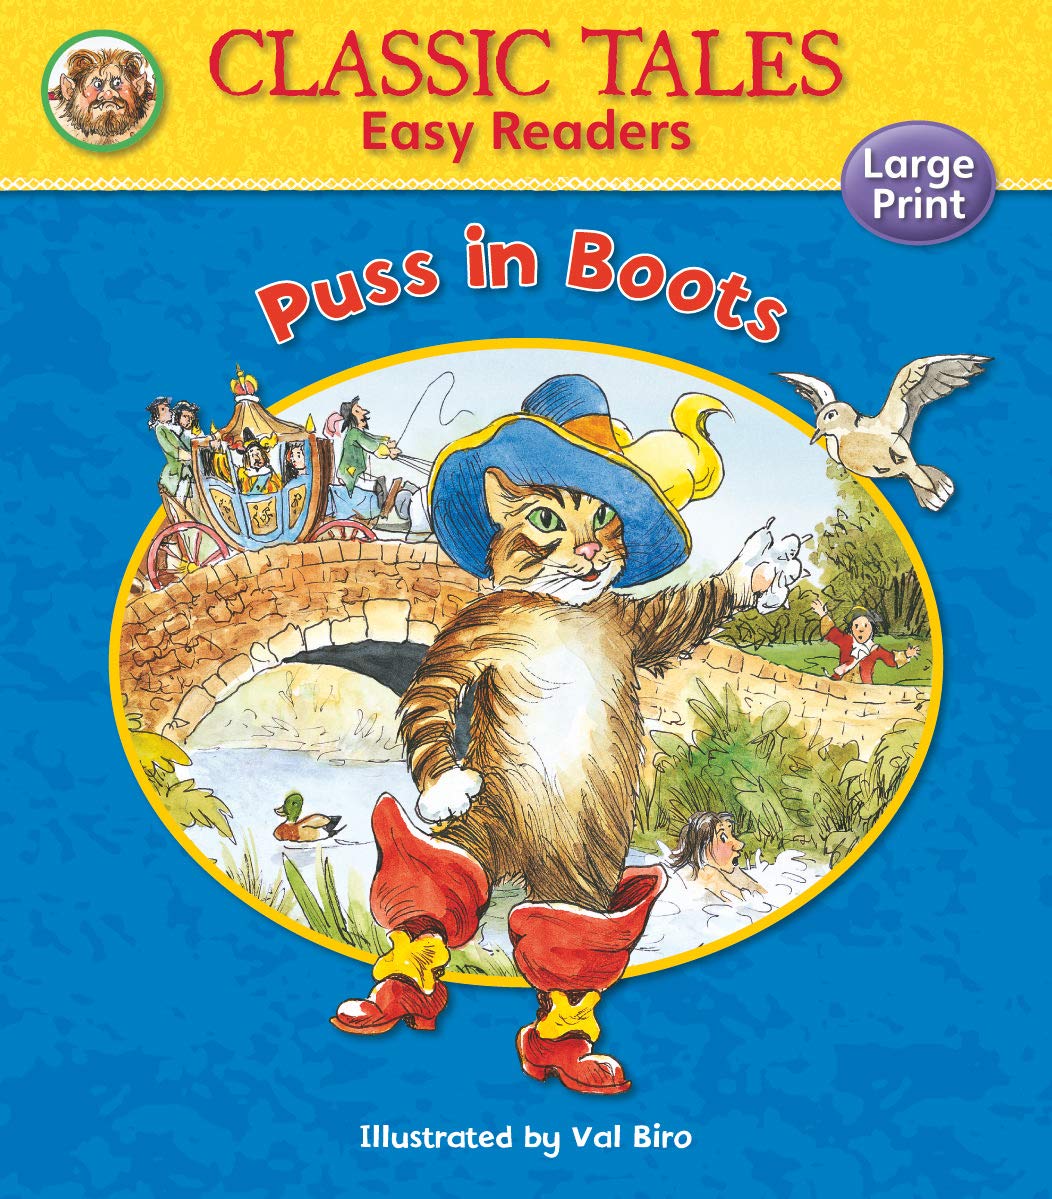 PUSS IN BOOTS (CLASSIC TALES EASY READERS)